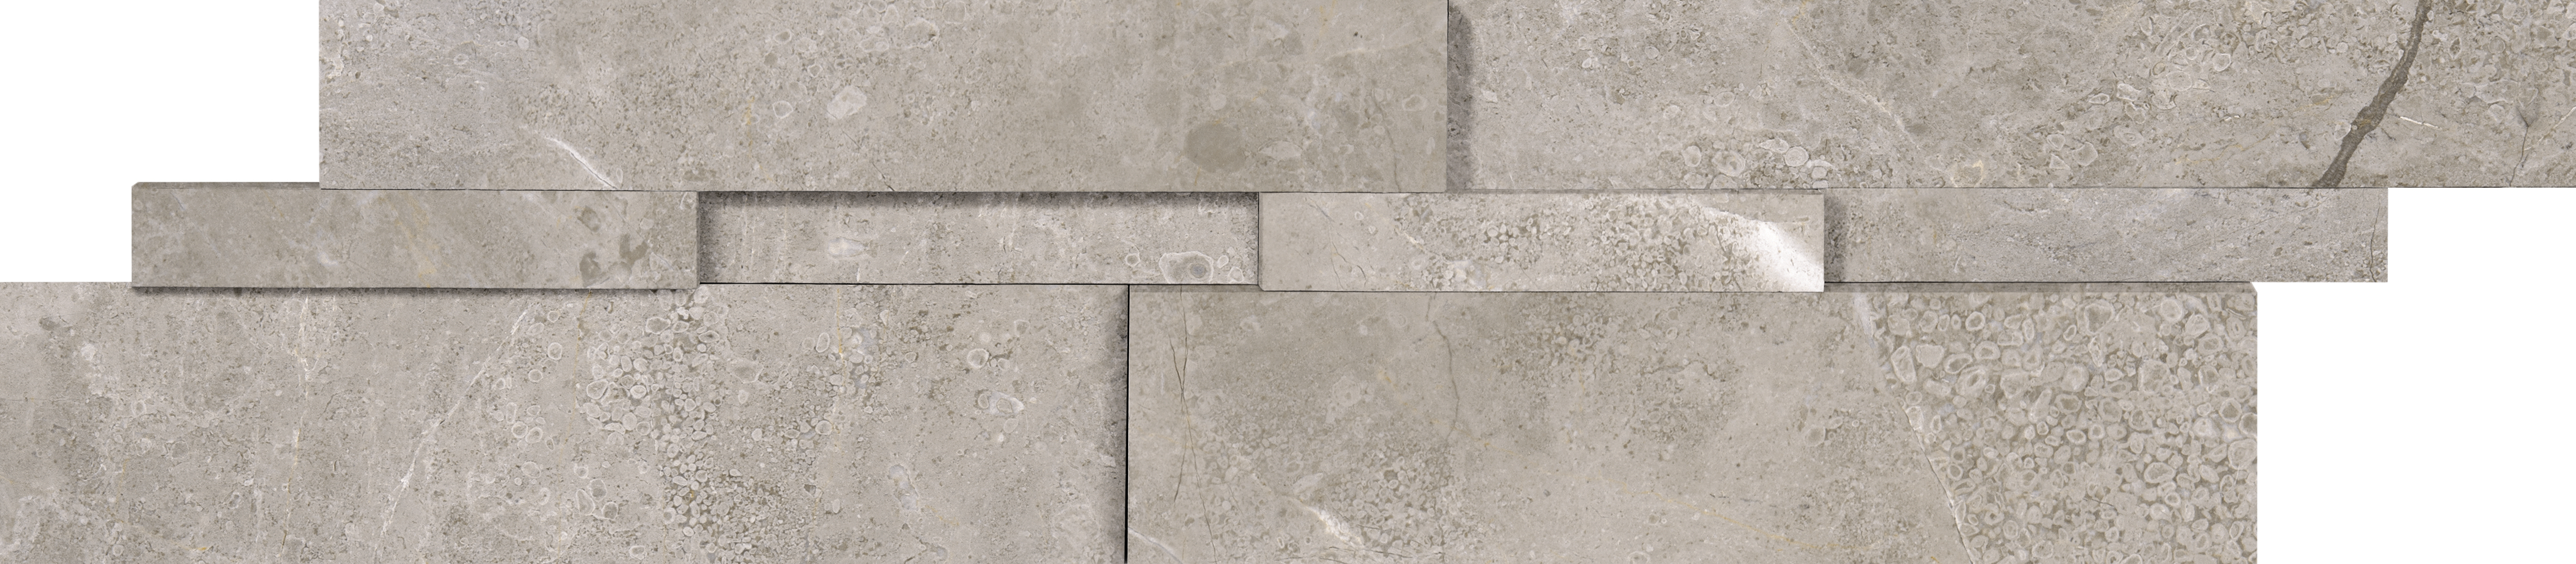 marble ritz gray pattern natural stone wall panel from cubics anatolia collection distributed by surface group international honed finish straight edge edge 6x24 interlocking shape